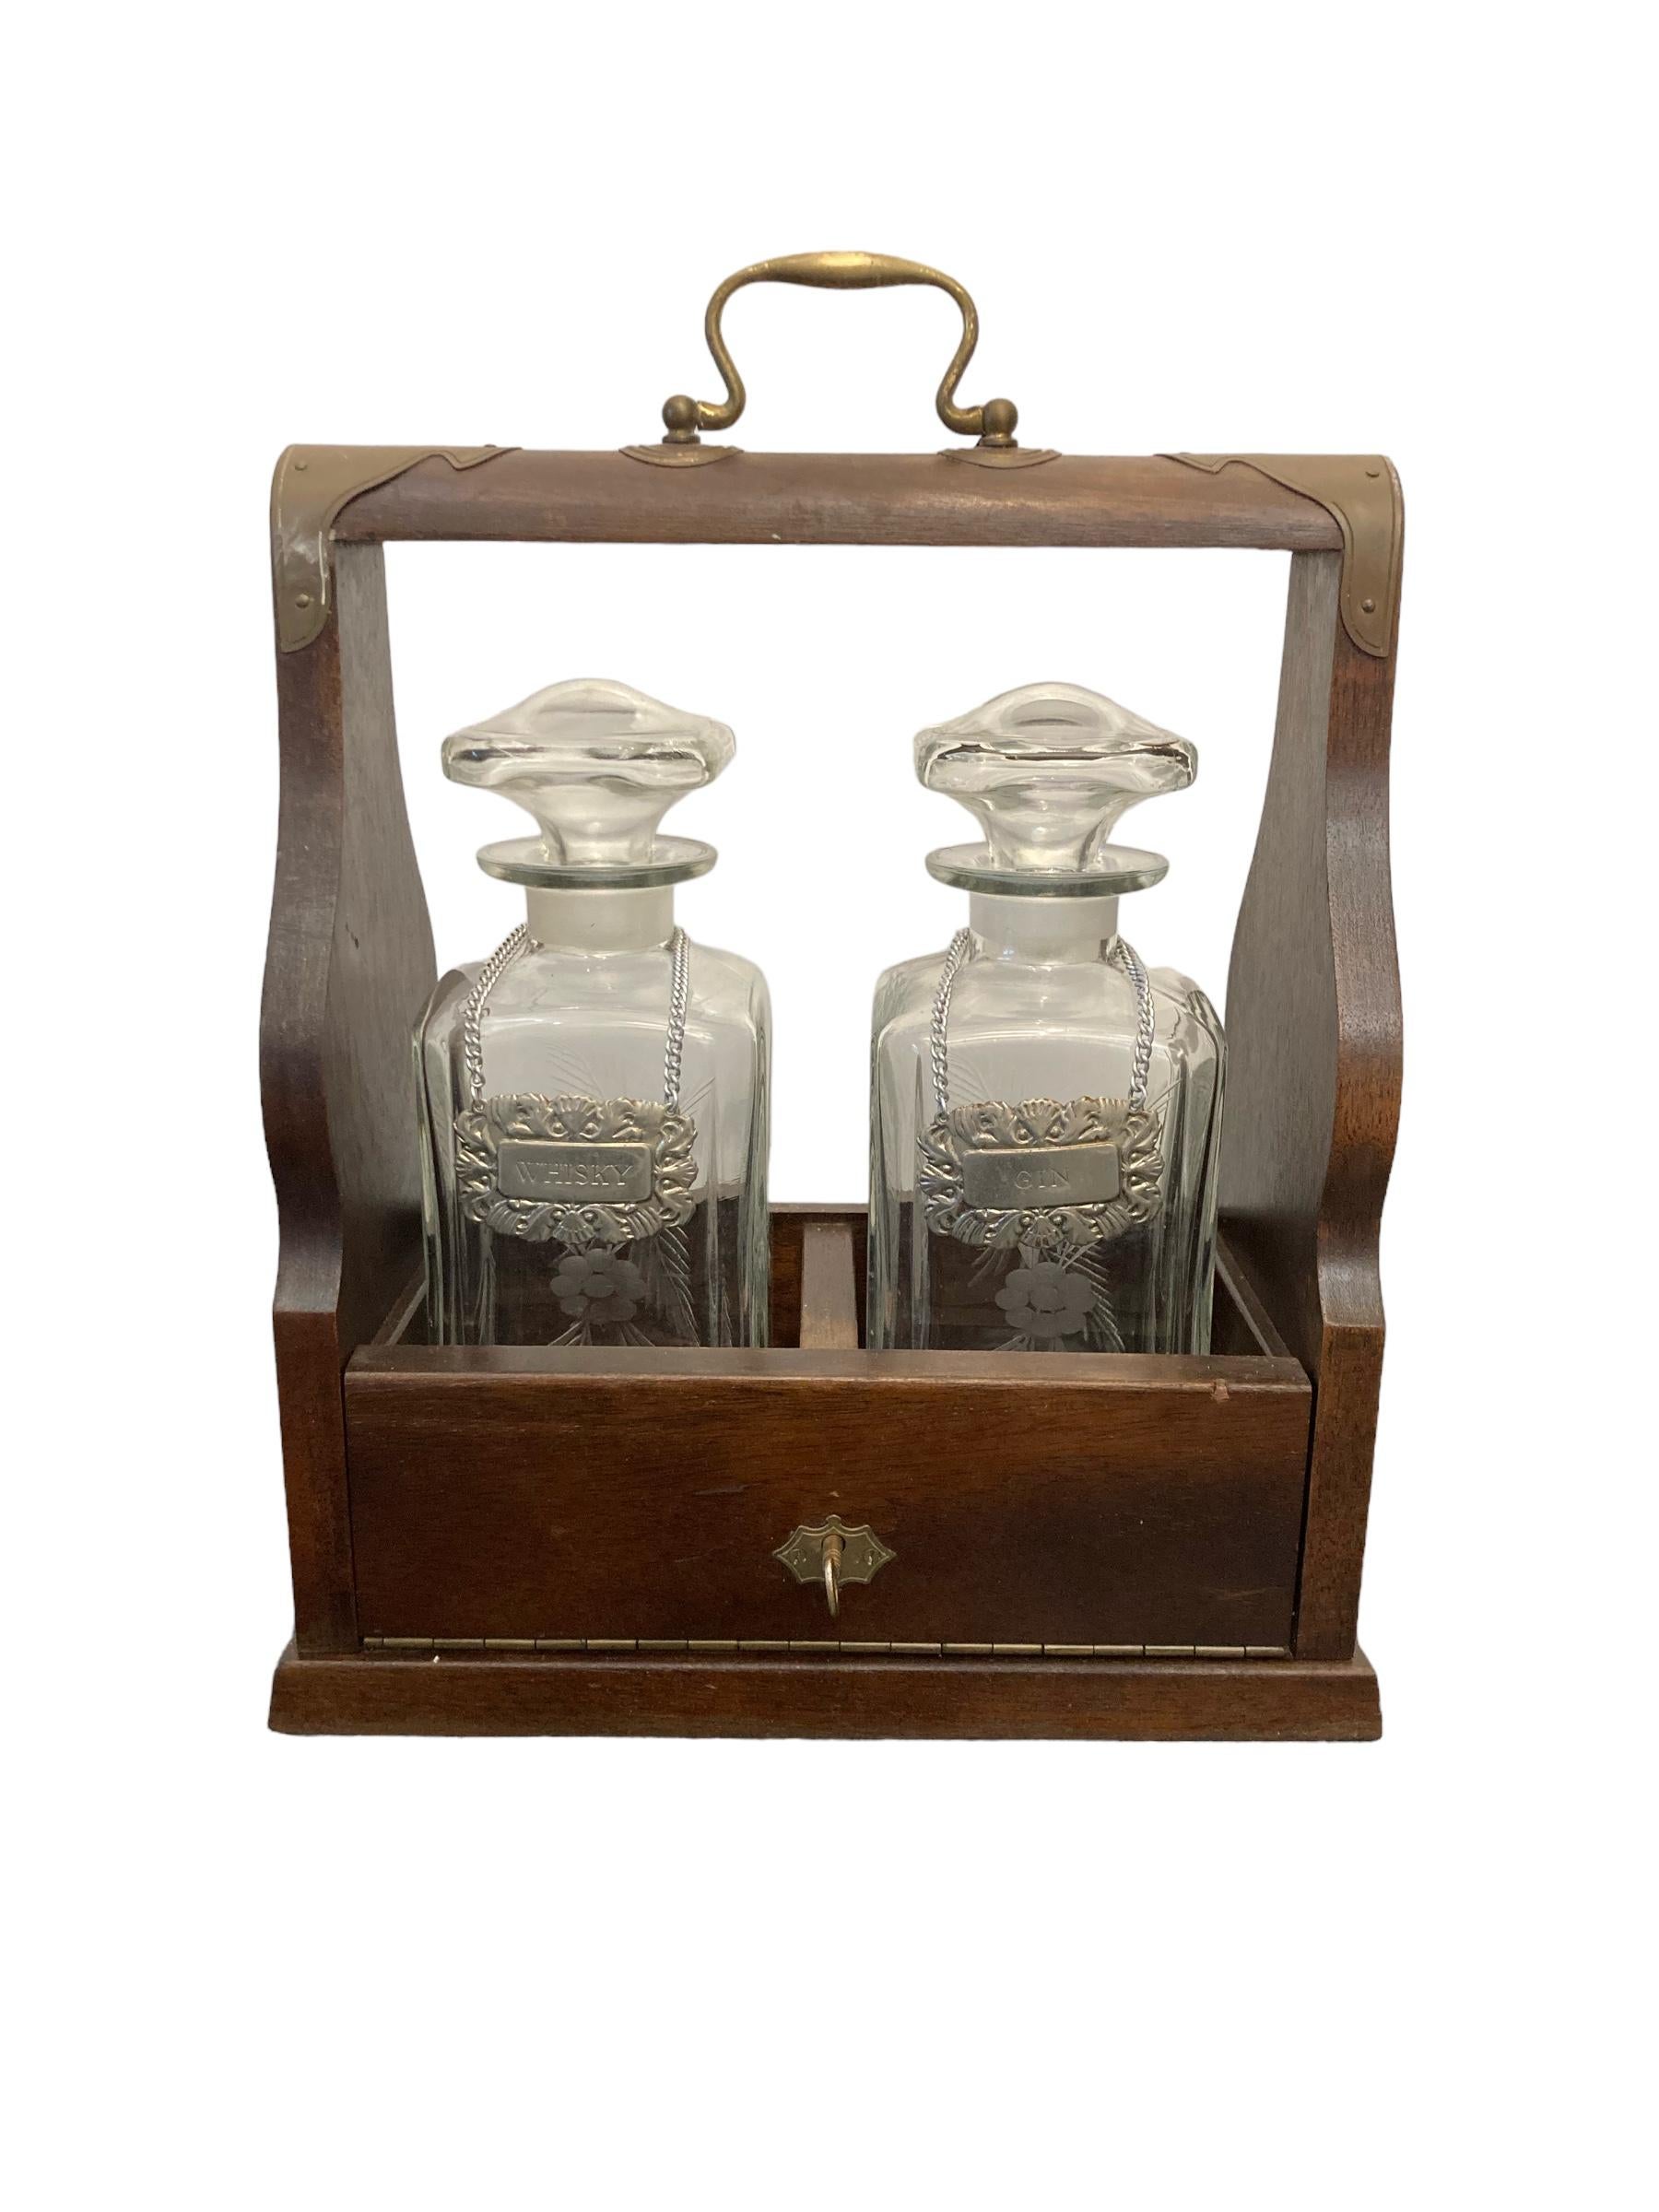 Victorian 2 Decanter Tantalus With Key   Brass handle Mahogany case silver plated Whiskey and Gin labels on chain. Good condition.
H: 32cm W: 27 cm D: 14cm